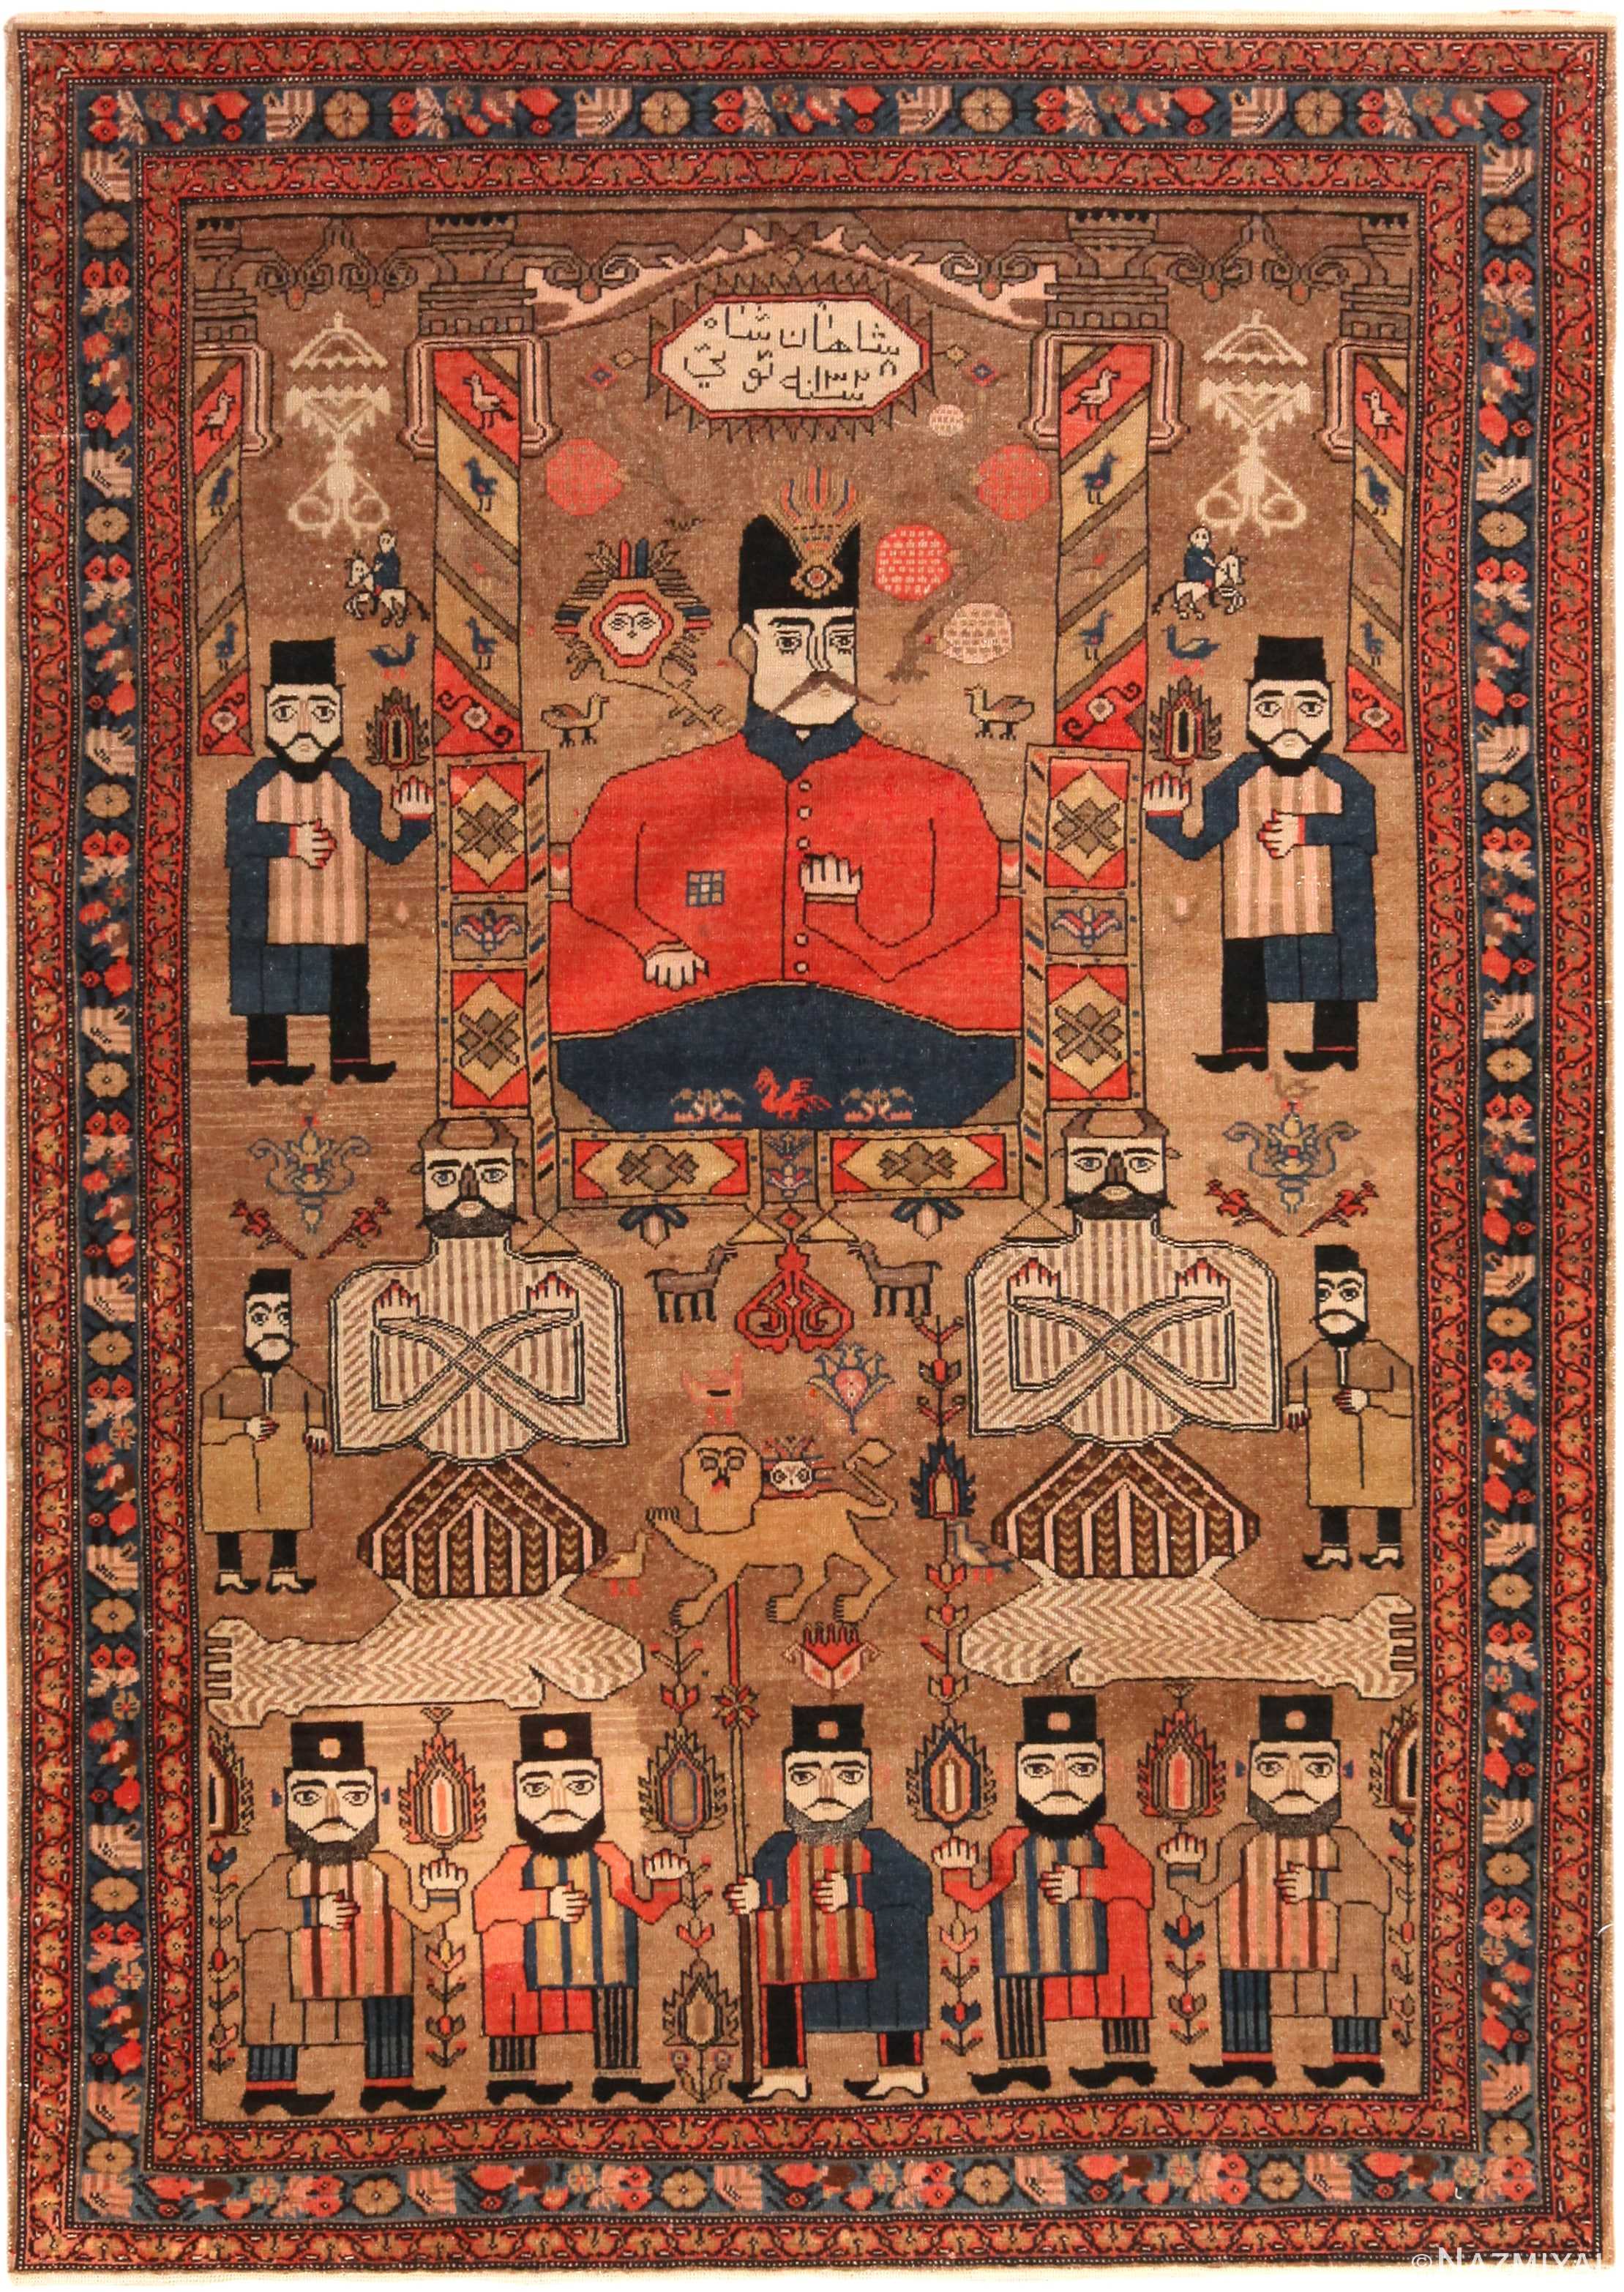 Antique Persian Pictorial Bakshaish Rug 71700 by Nazmiyal Antique Rugs